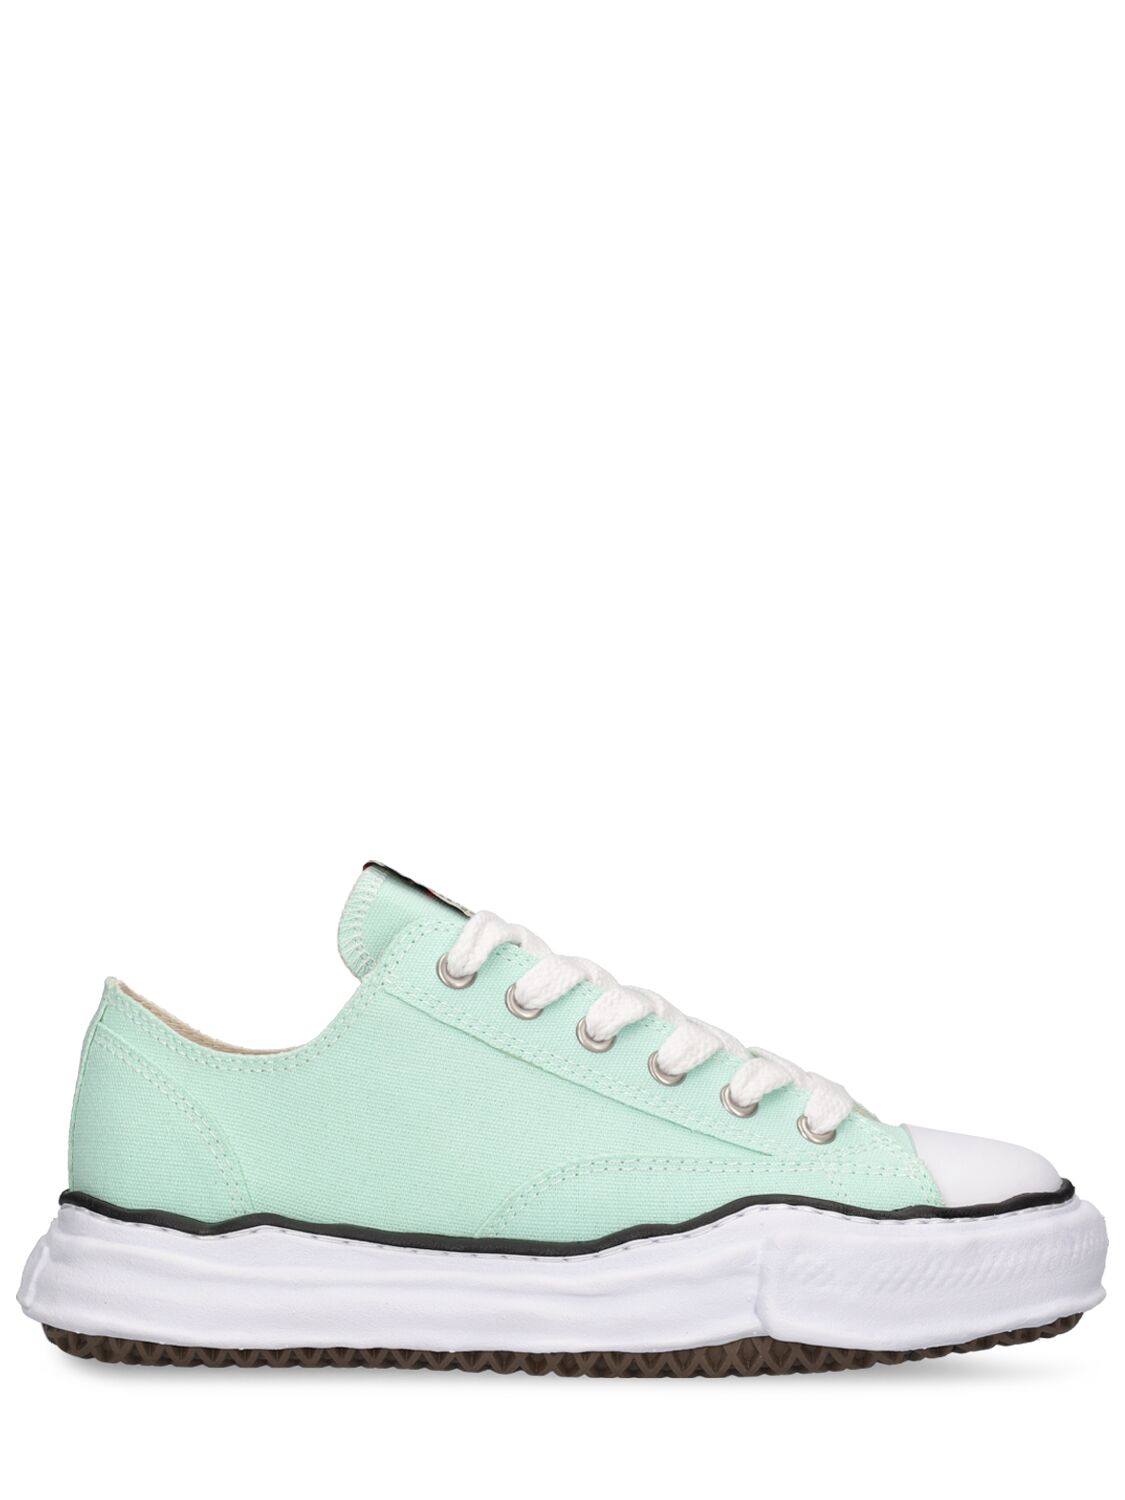 Miharayasuhiro Peterson Low Og Sole Canvas Sneakers In Light Blue